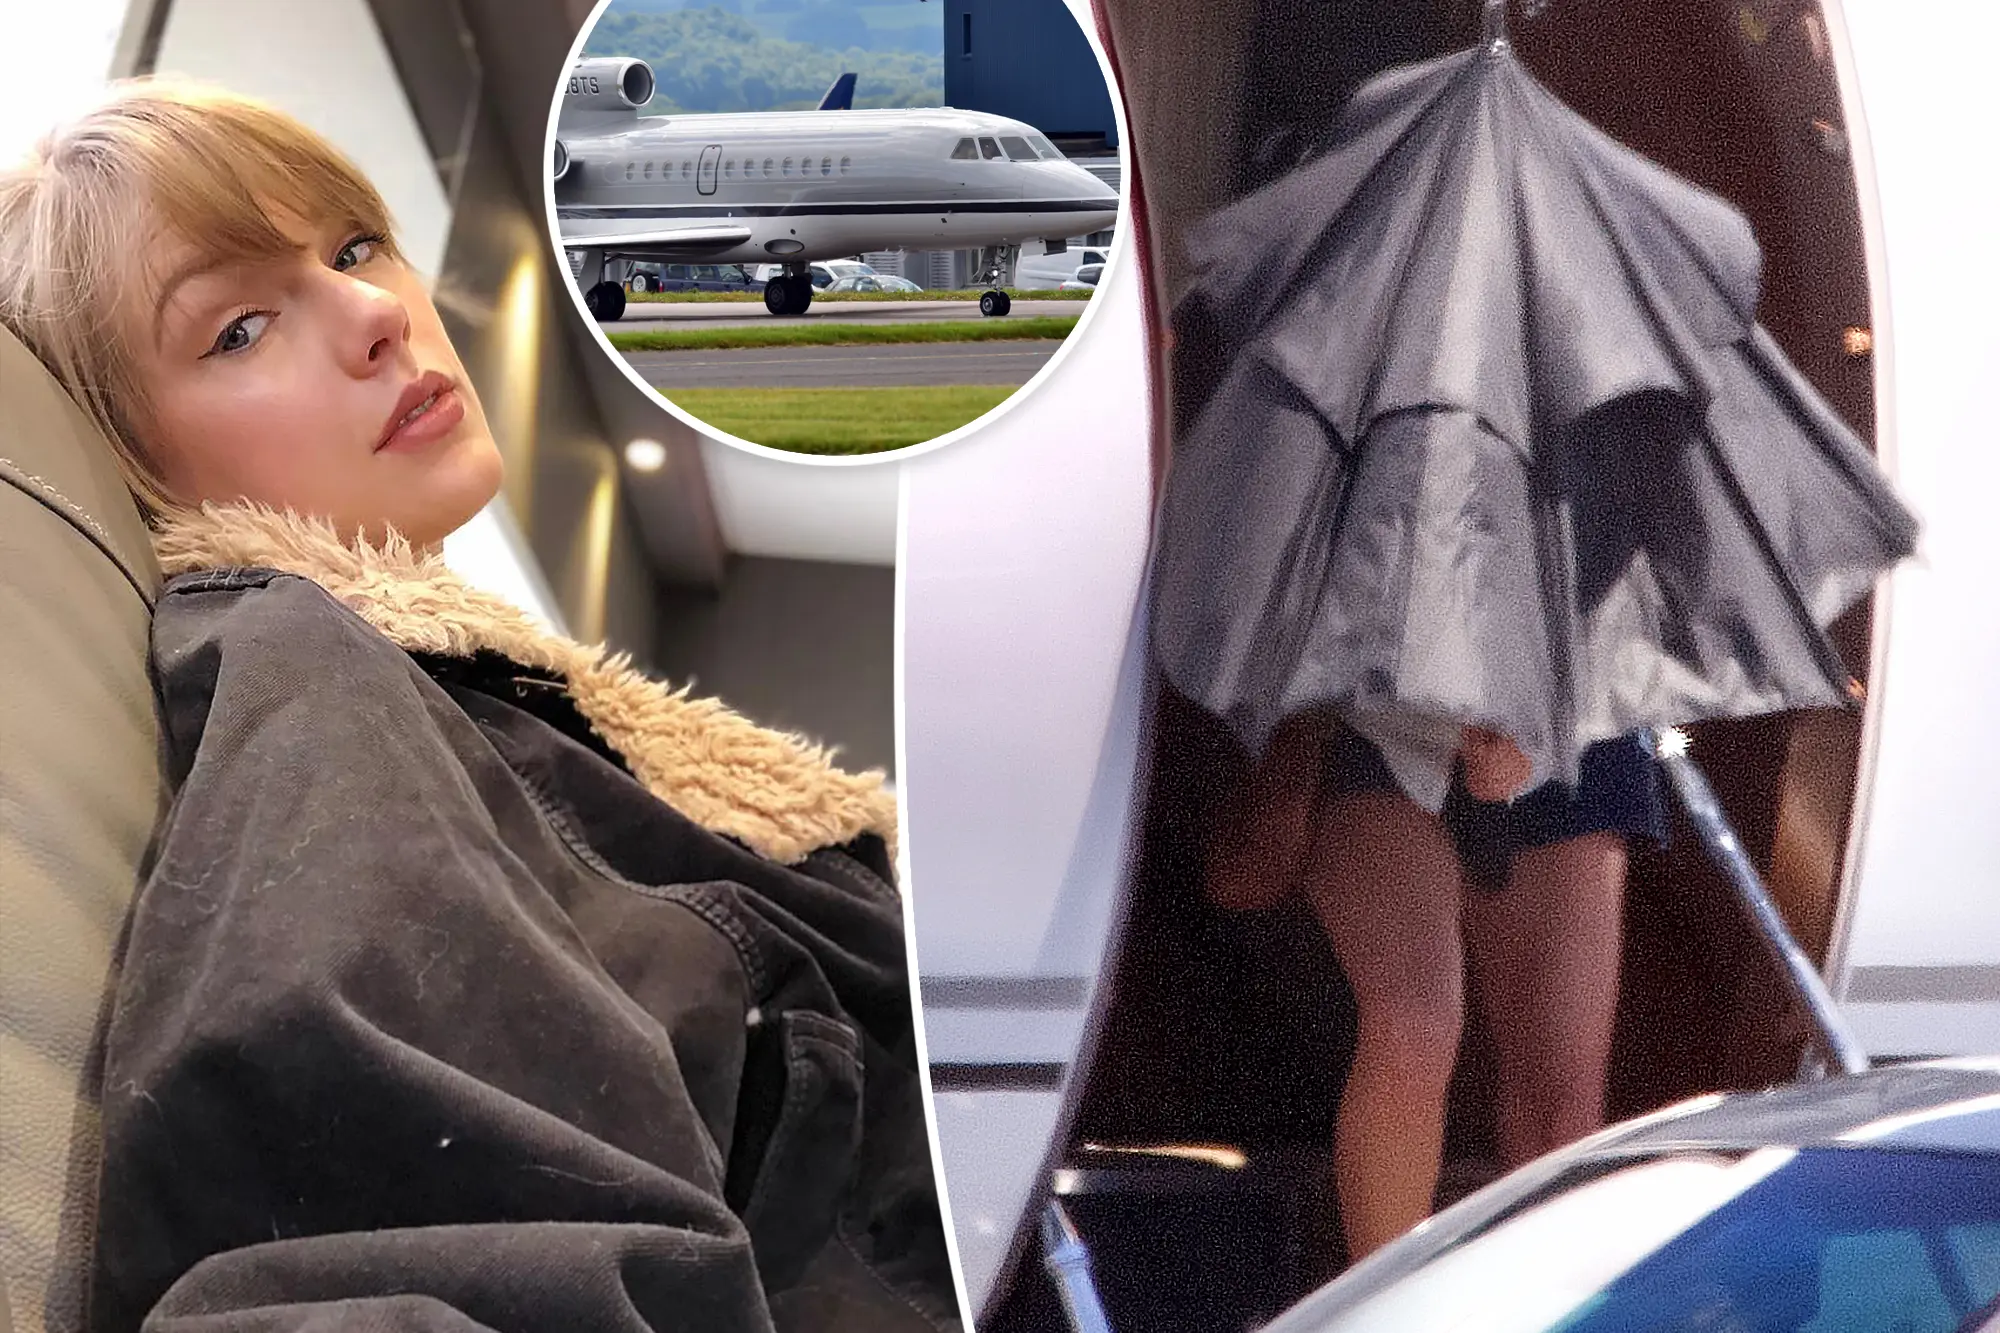 EXCLUSIVE: Taylor Swift steps off private jet hidden by an umbrella at Edinburgh airport before being whisked away under police escort as excitement builds for first UK leg of sell-out Eras tour